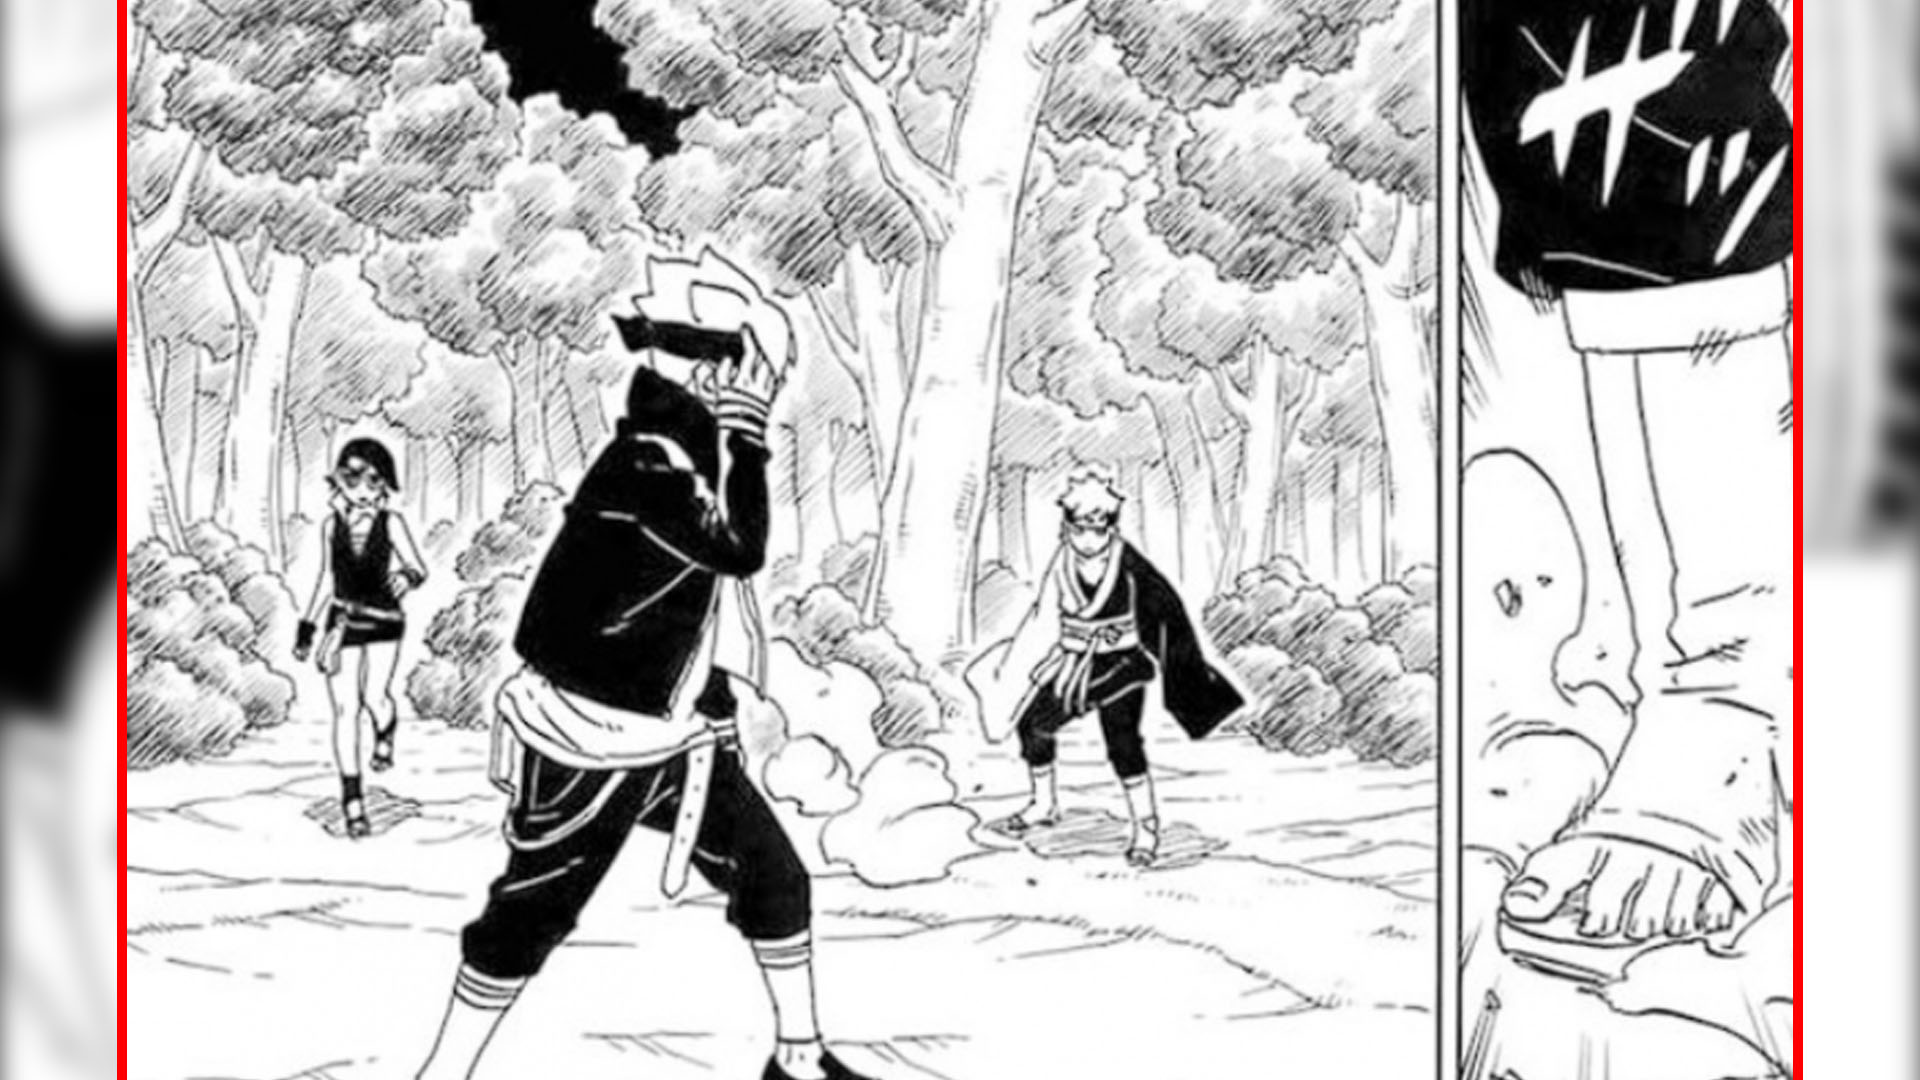 Something is terribly wrong with Boruto in Chapter 80, but nobody